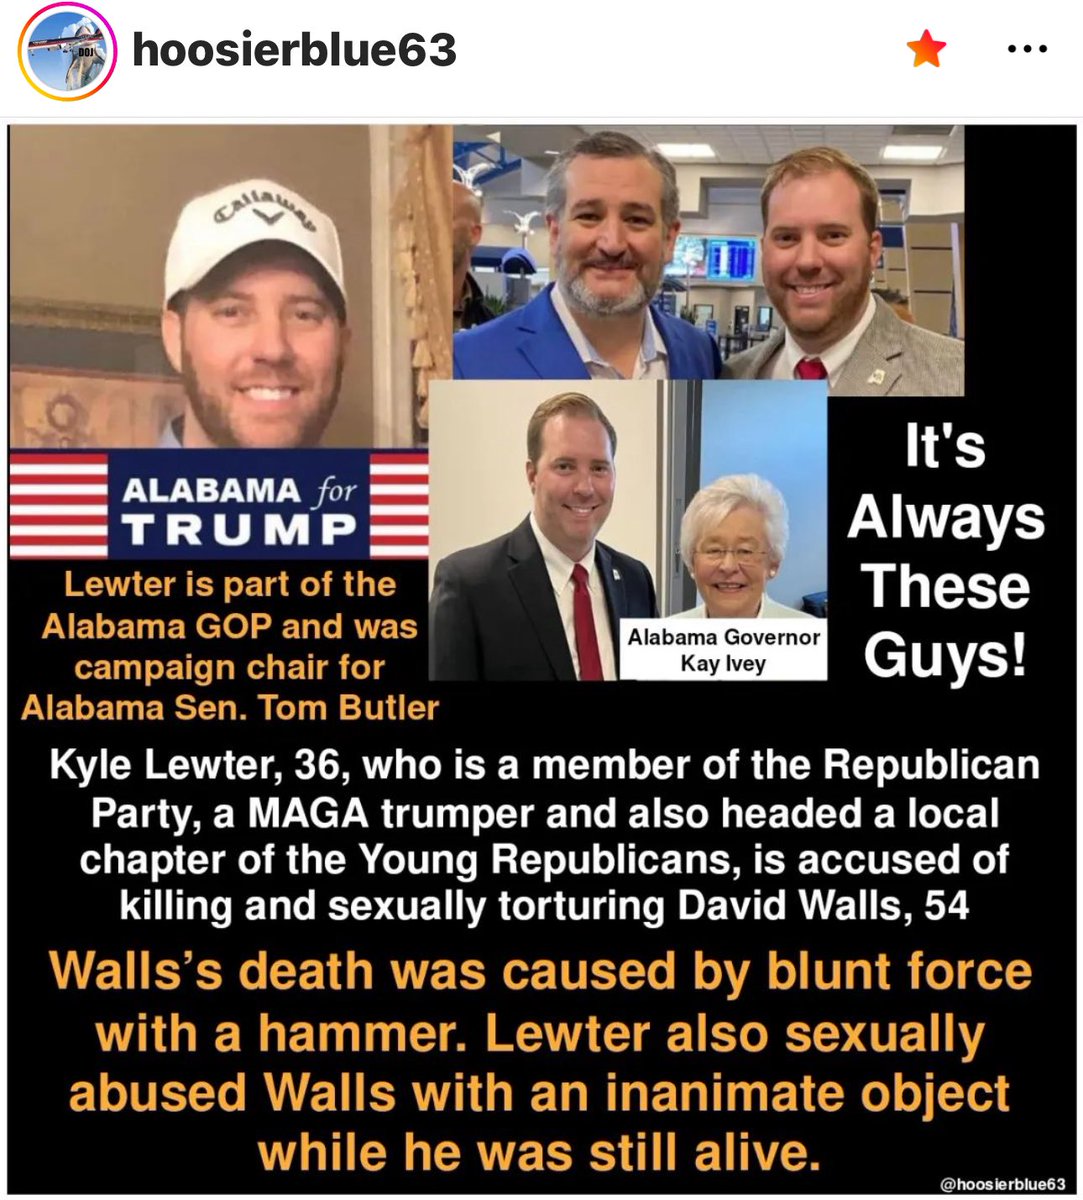 The Republican Party is full of Criminals! Corruption, Fraud, Conspiracies, Lies, Rape, Sex Crimes, Pedophilia, Adultery….. the list goes on and on of everything they are doing in front of us! And “It’s Always These Guys”!👇🏼